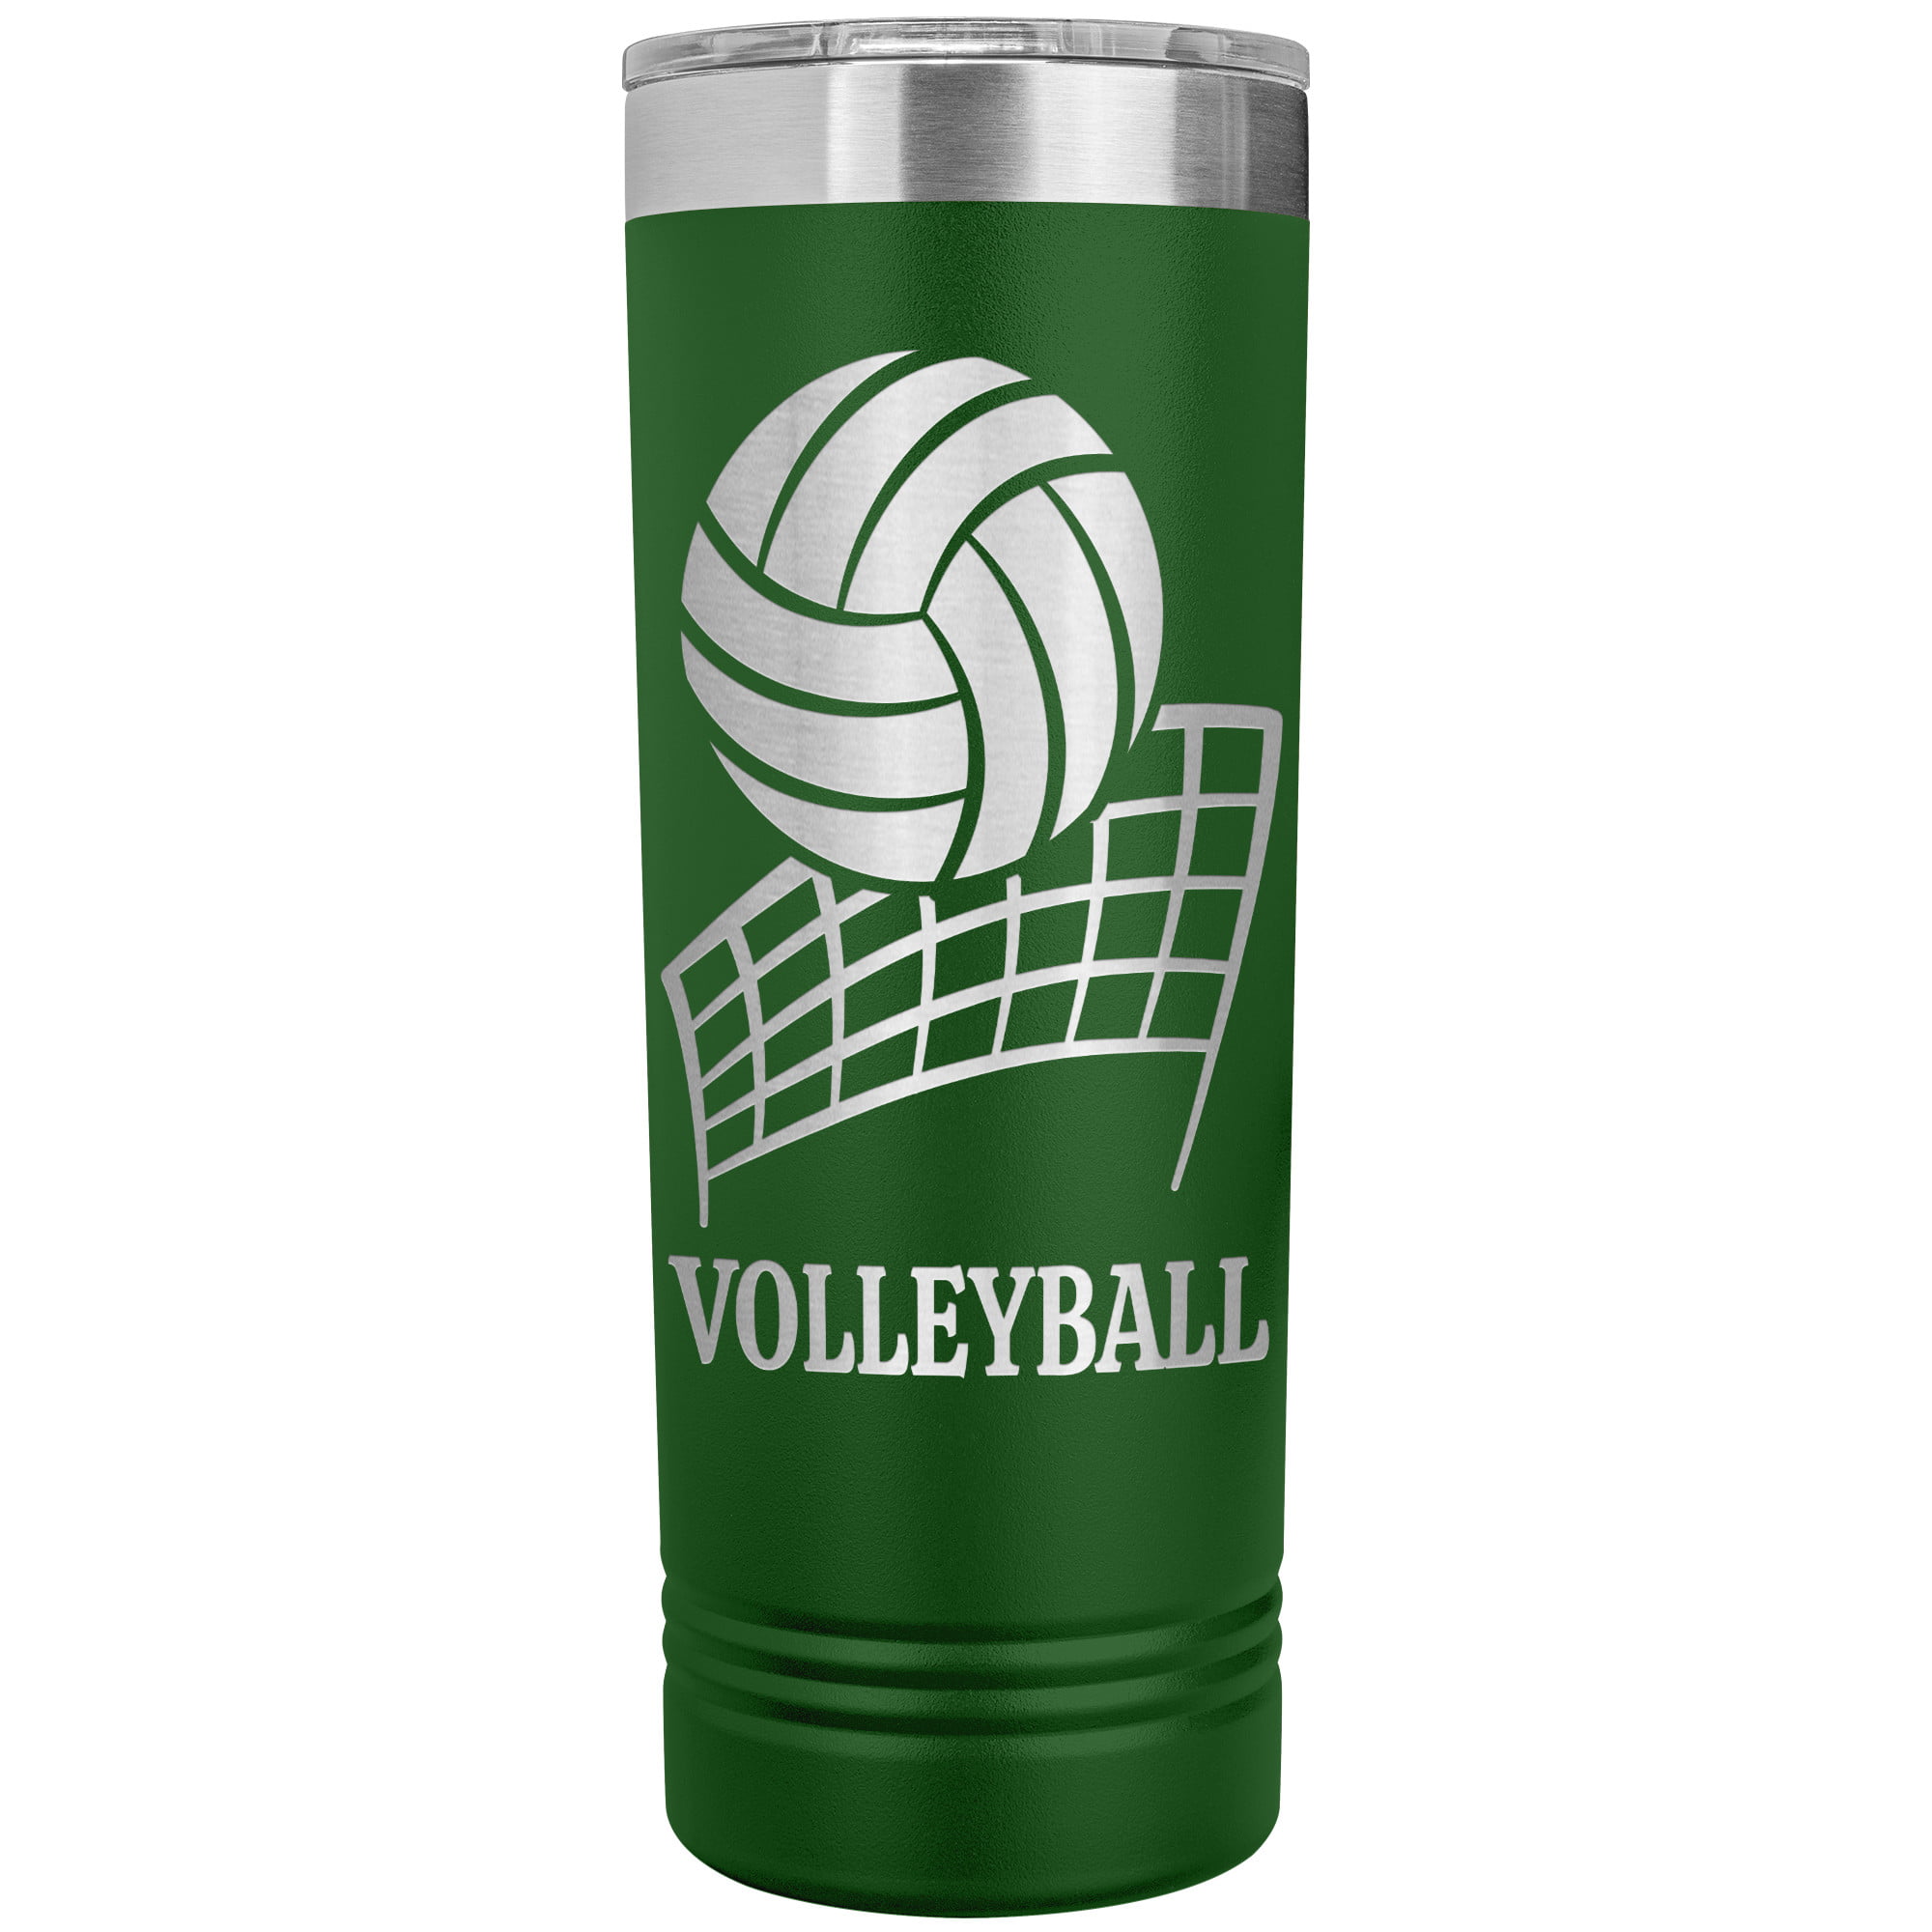 Nook Volleyball 20 oz tumblers with logo, add name as an option